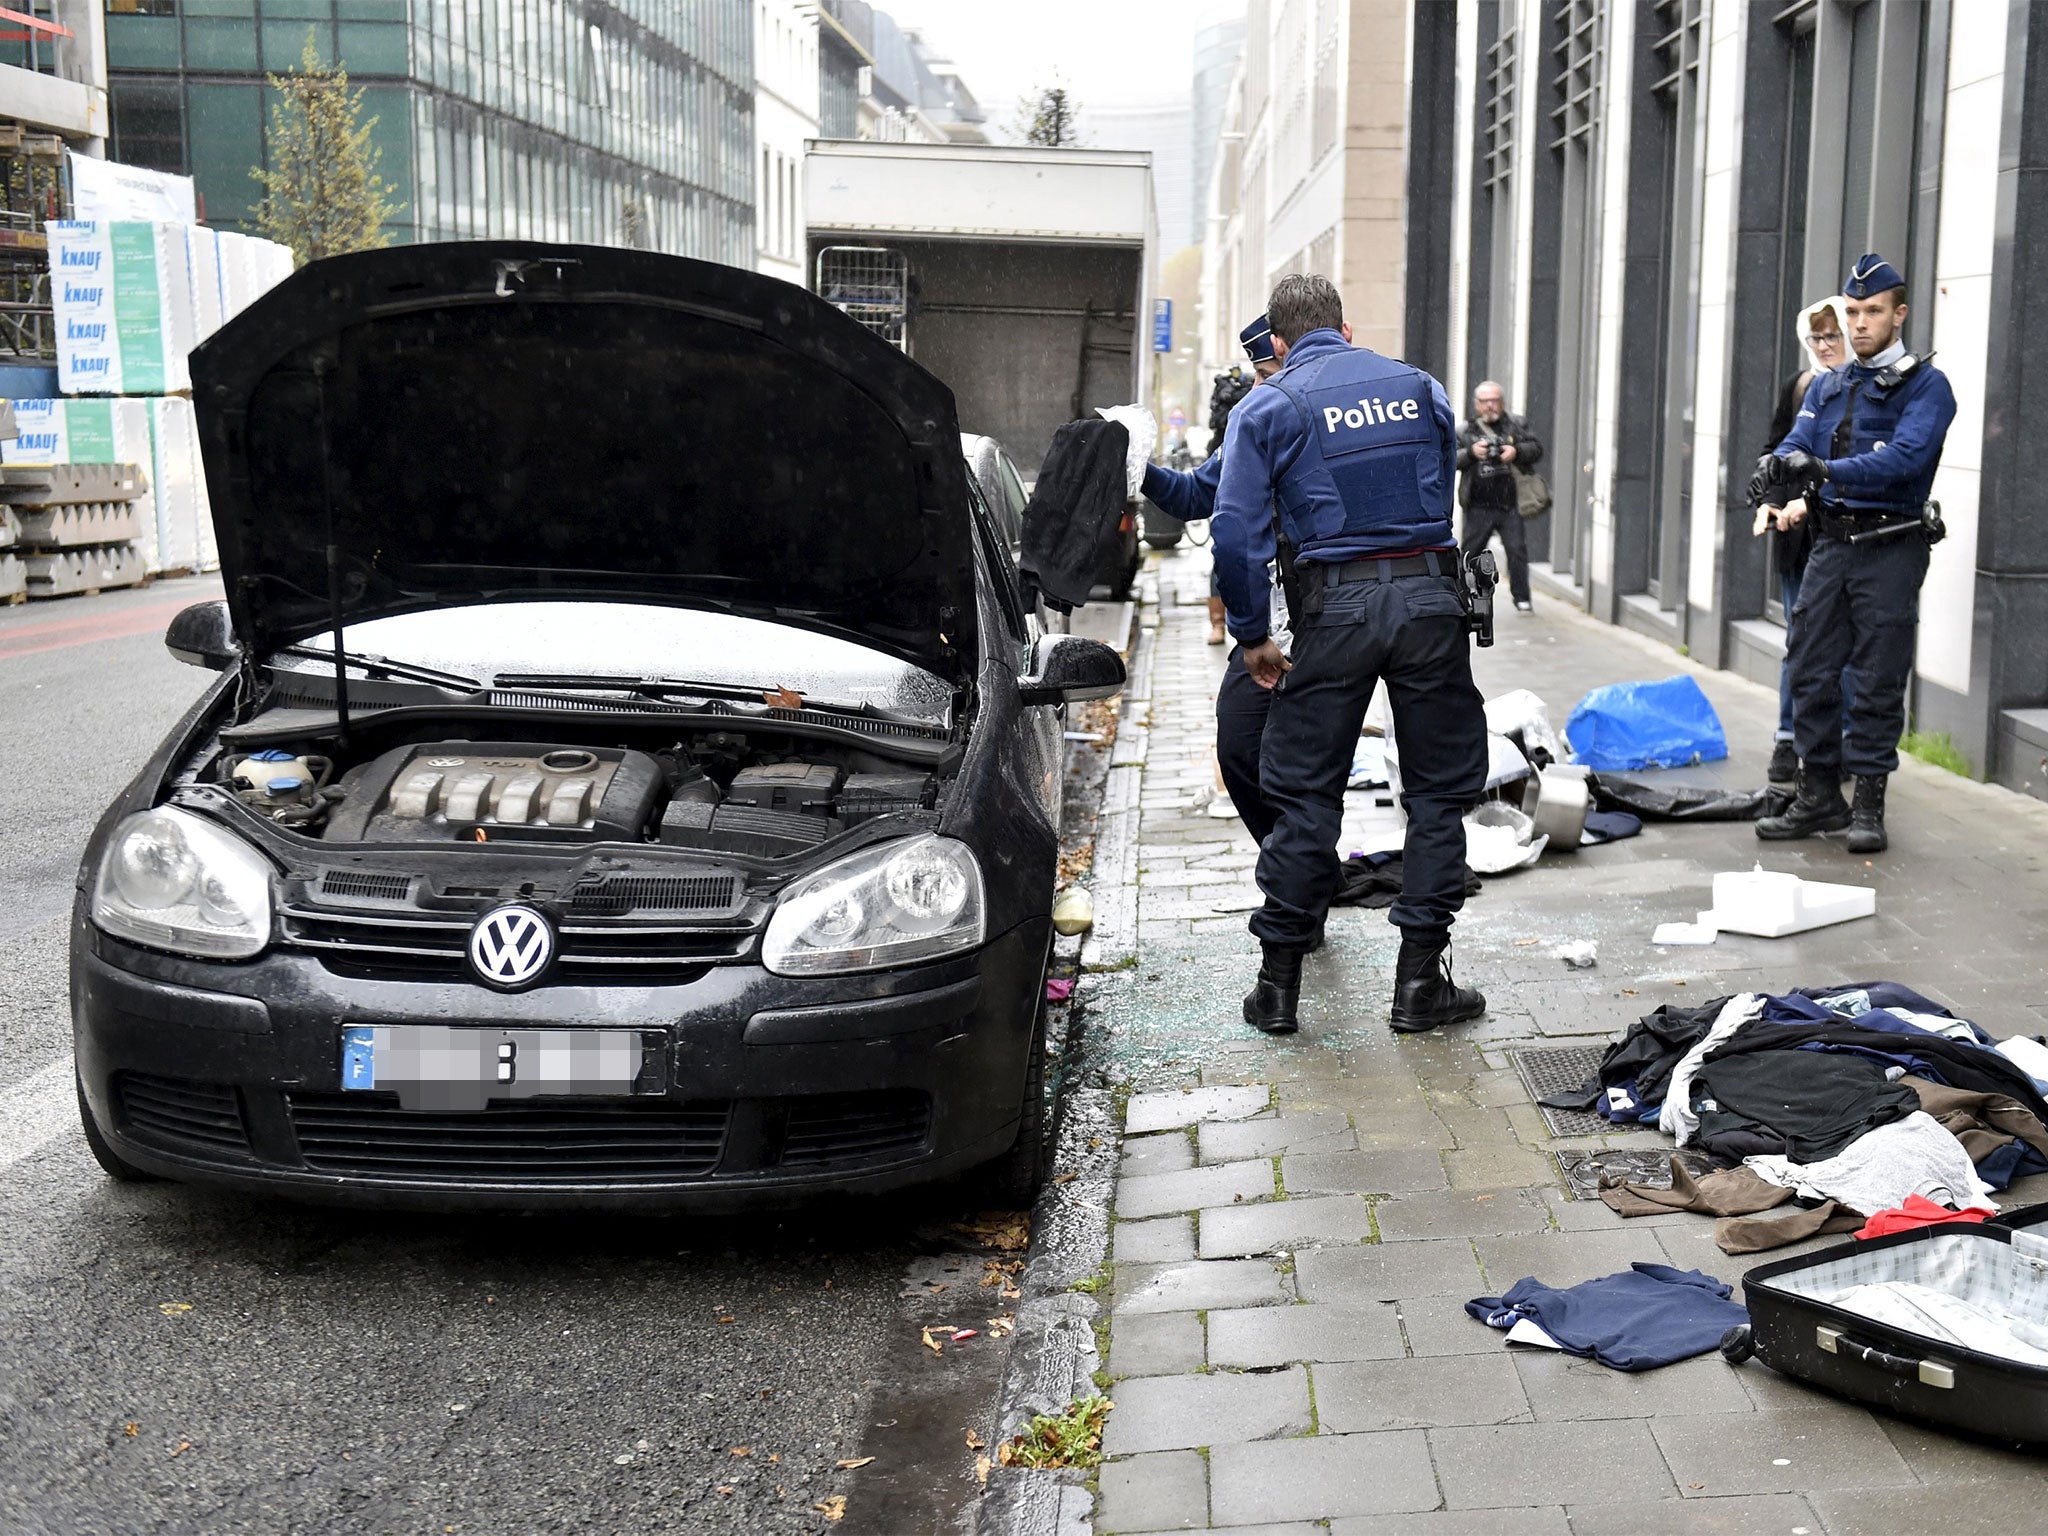 Belgian police search a car during raids in Brussels